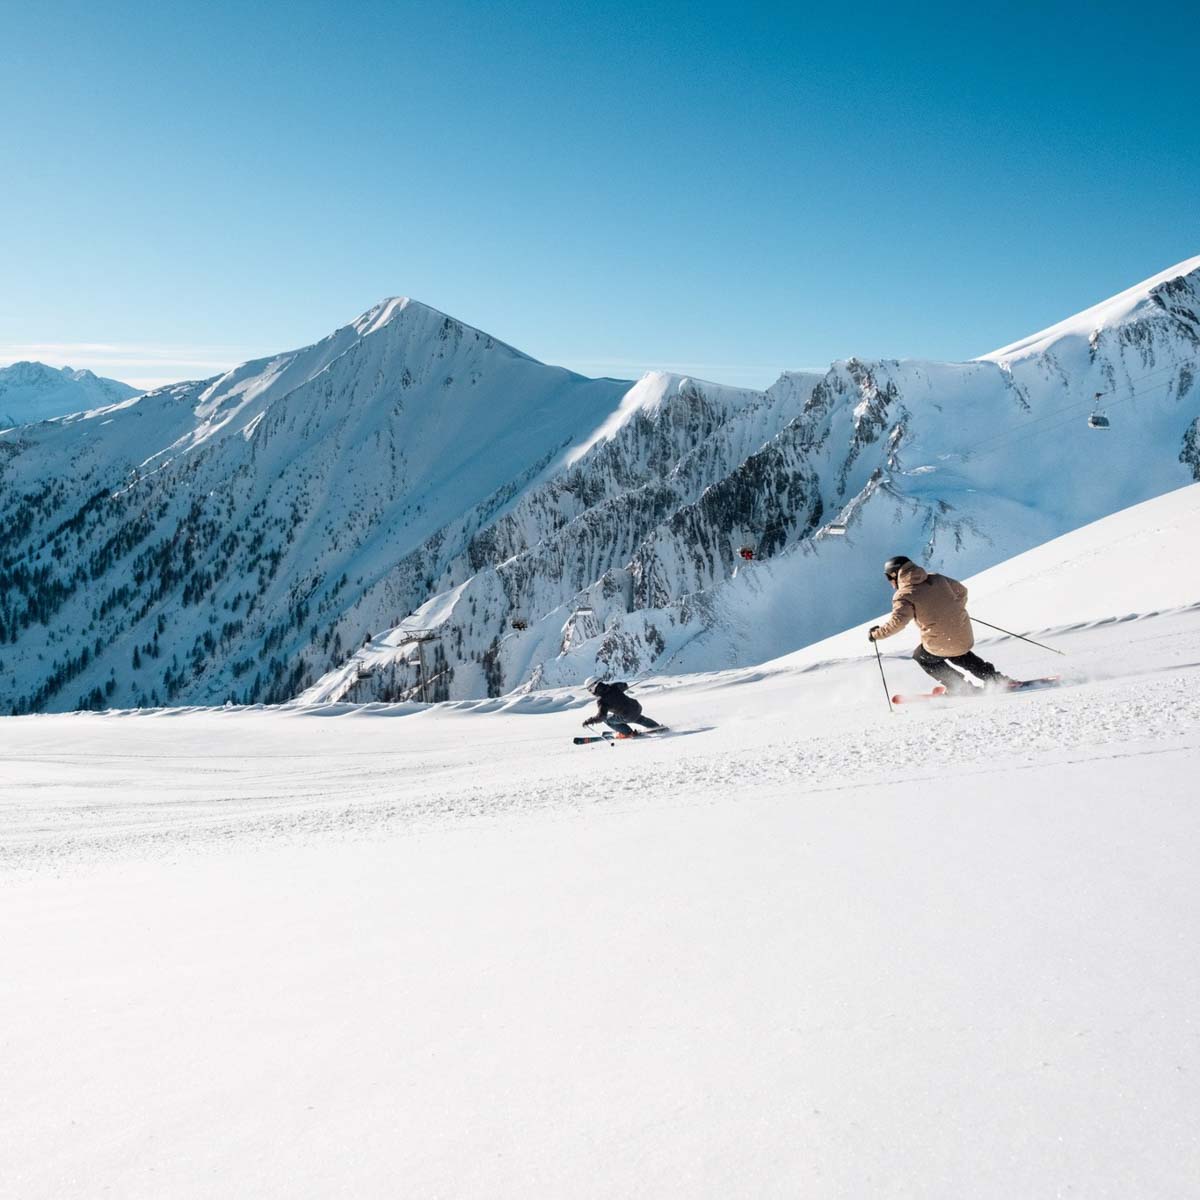 two skiers chase each other down a white piste, surrounded by white coated mountains